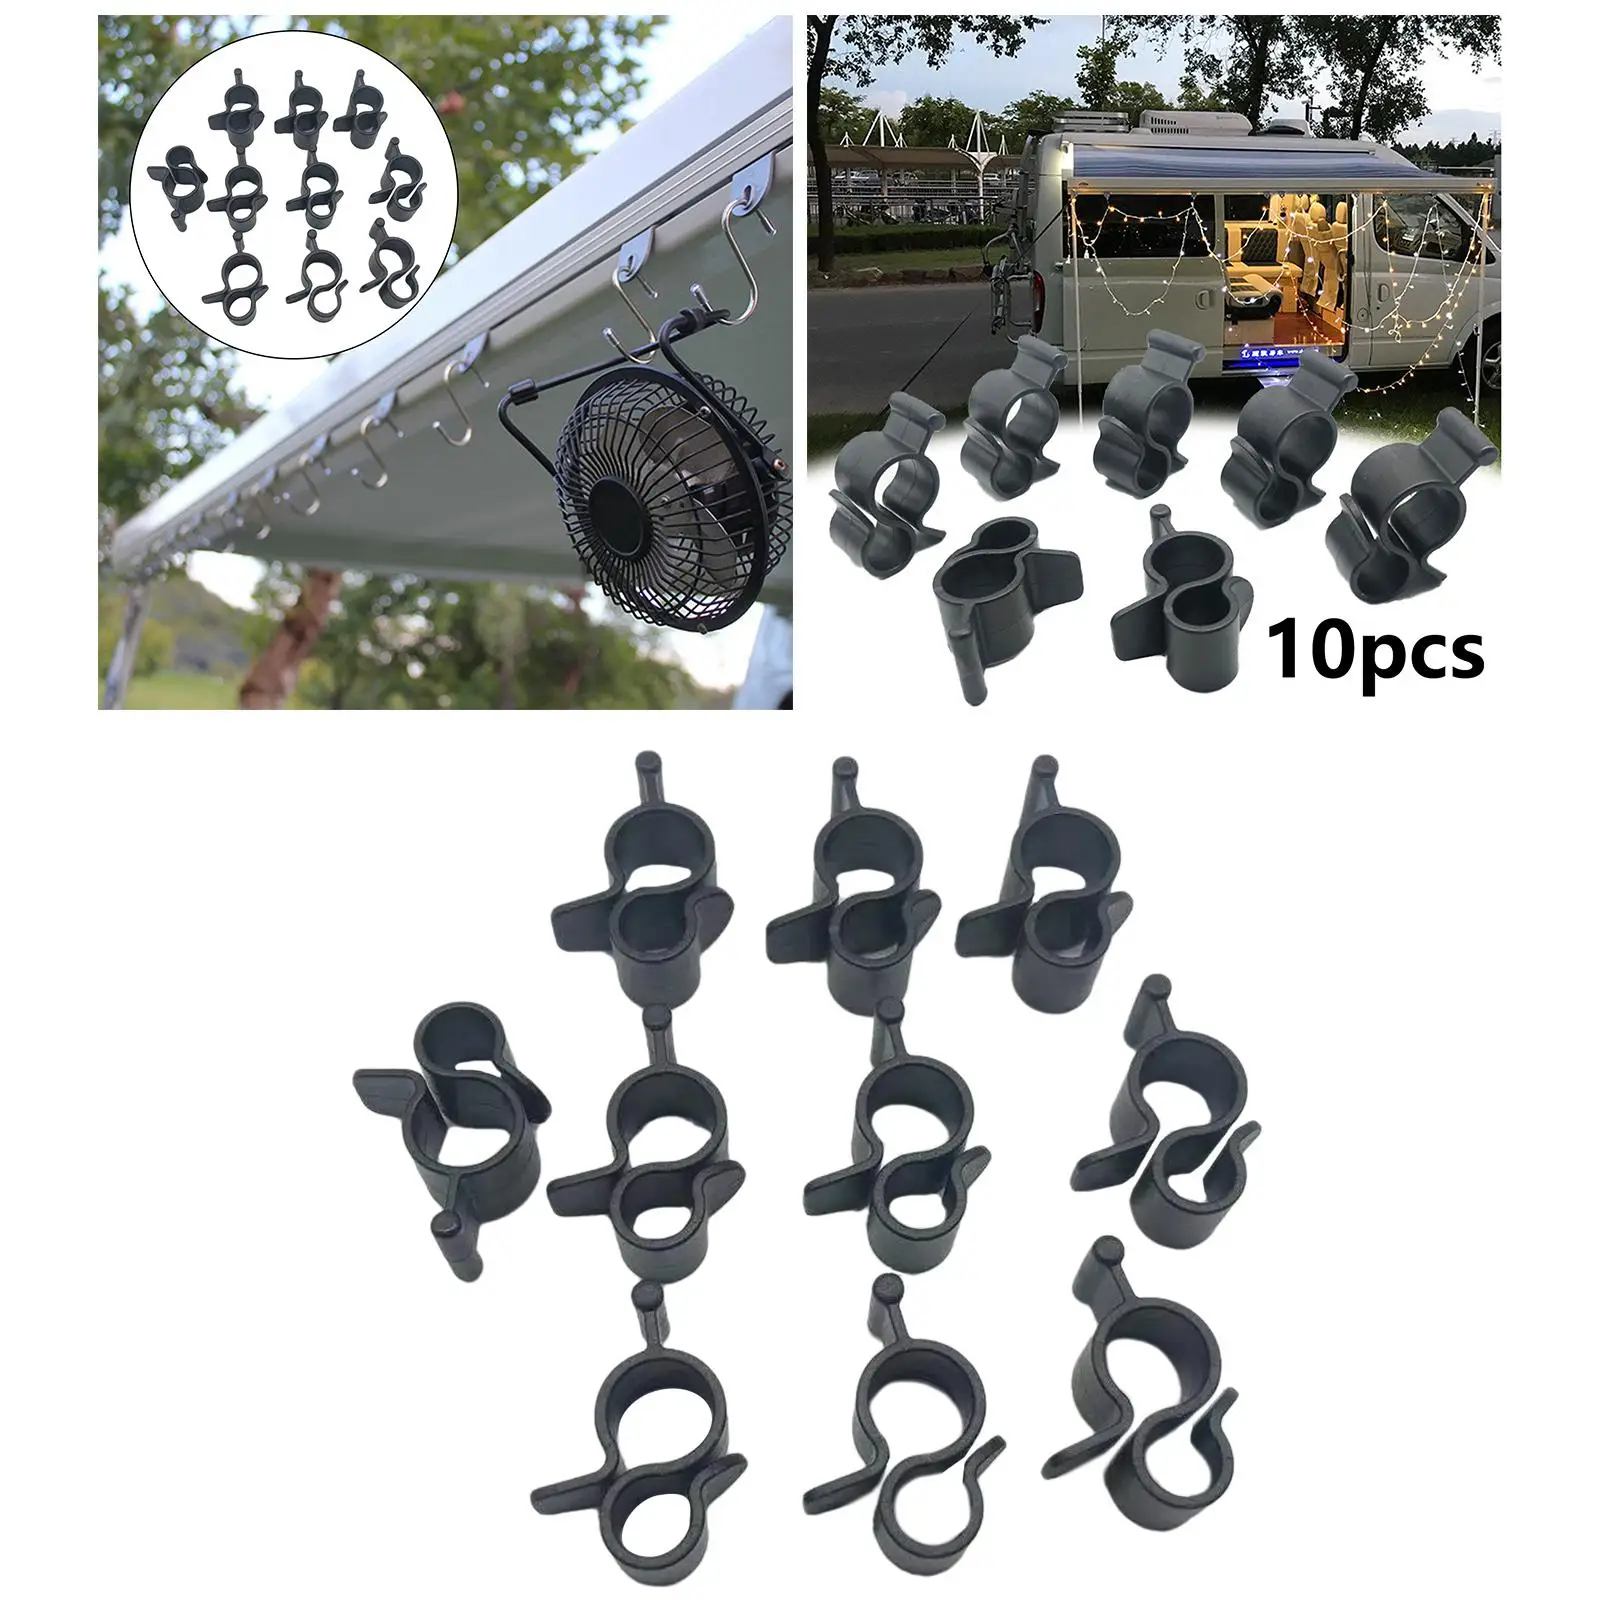 10 Pieces Awning Clips Standard Camping String Light